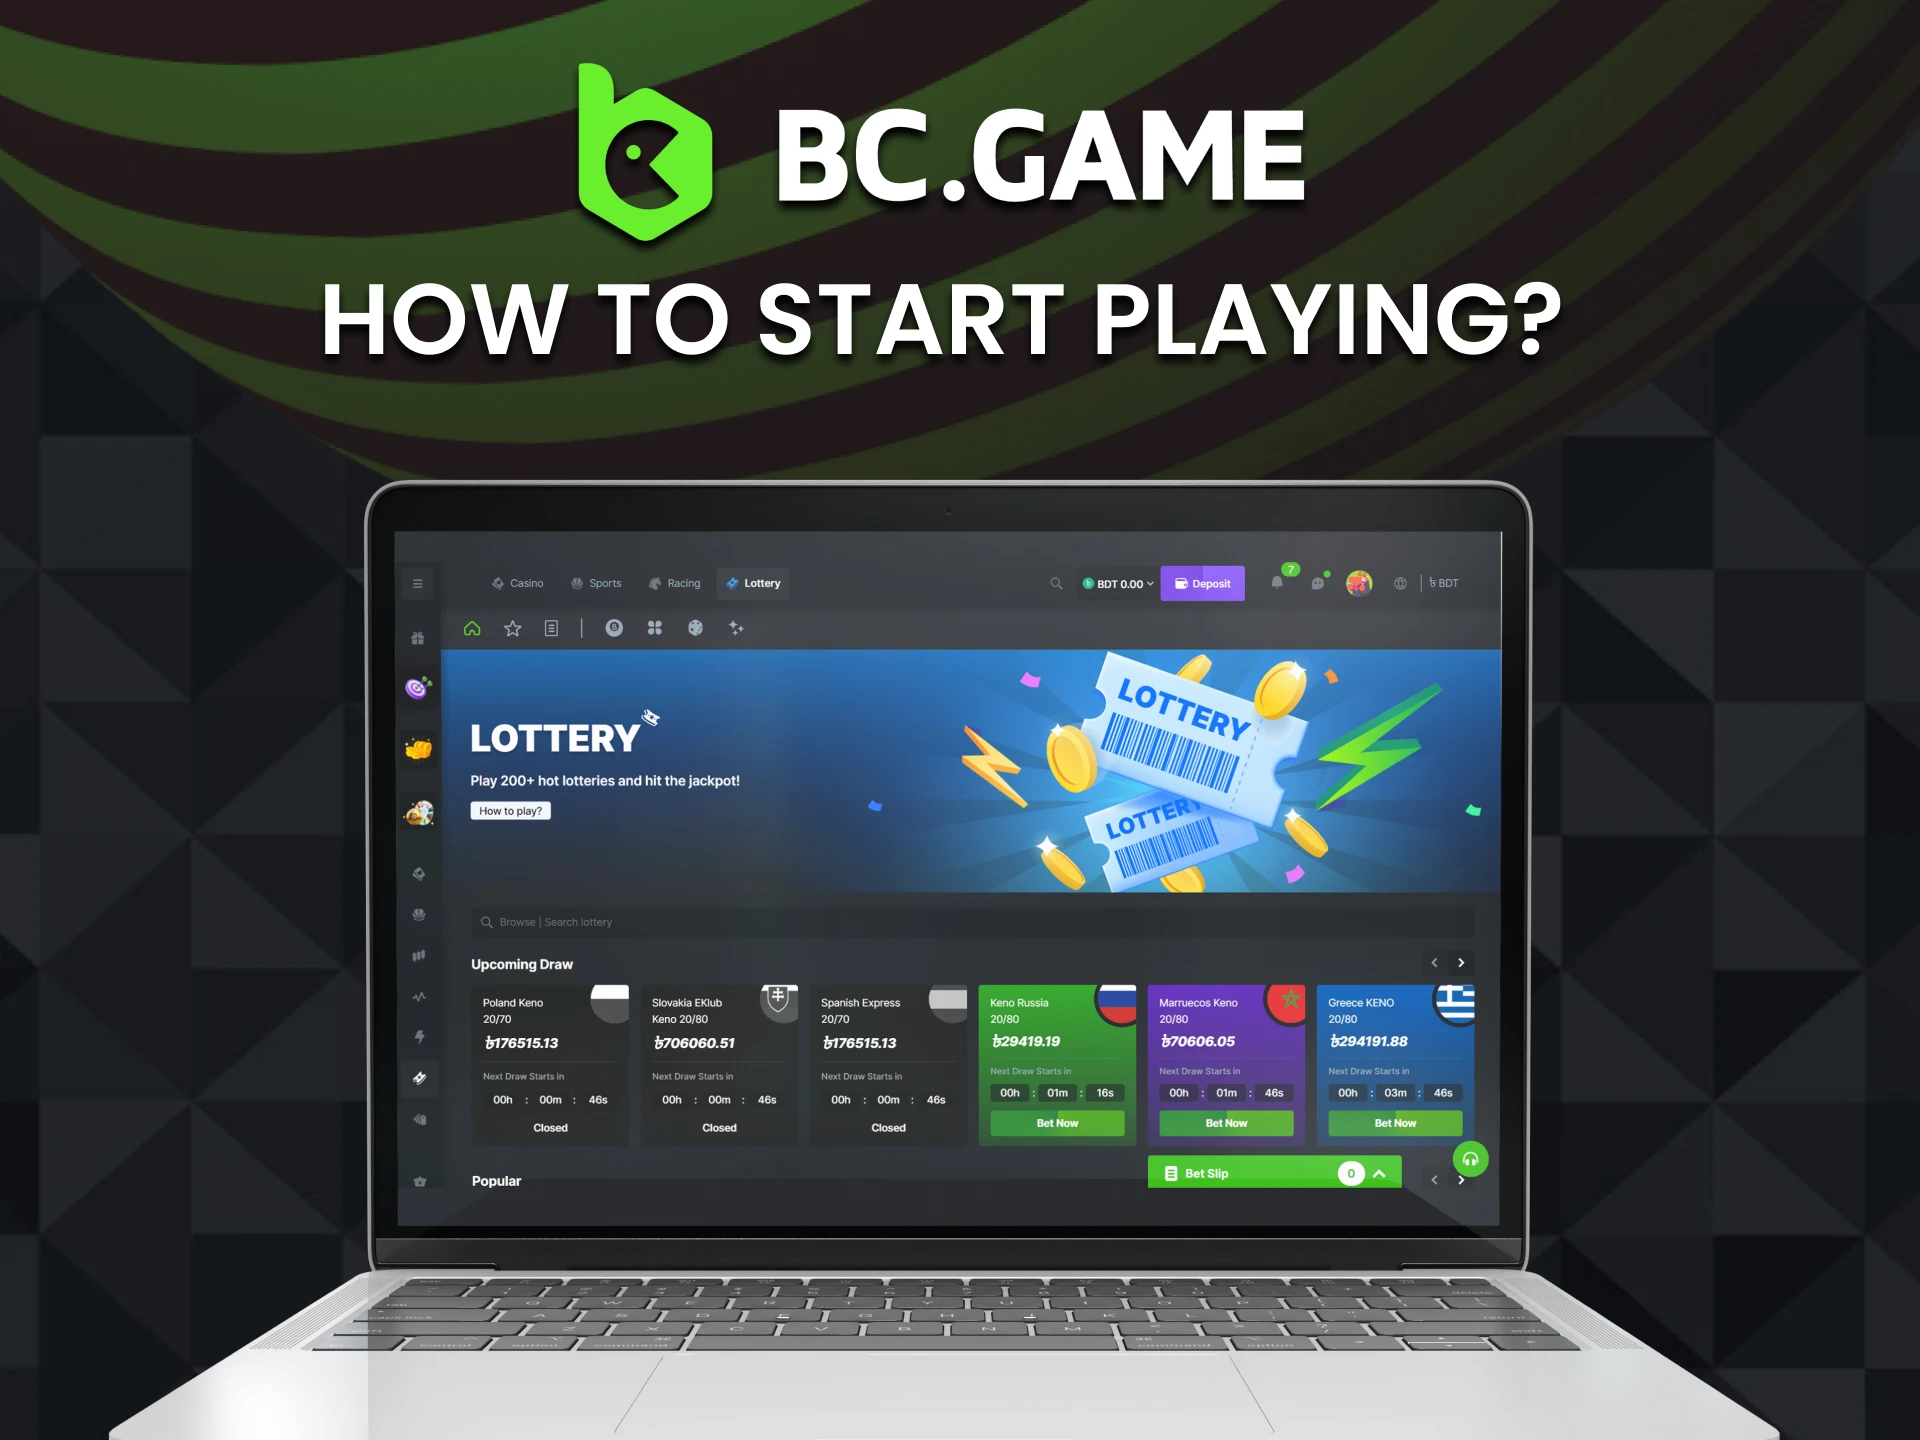 Go to the lottery section on the BC Game website to play.